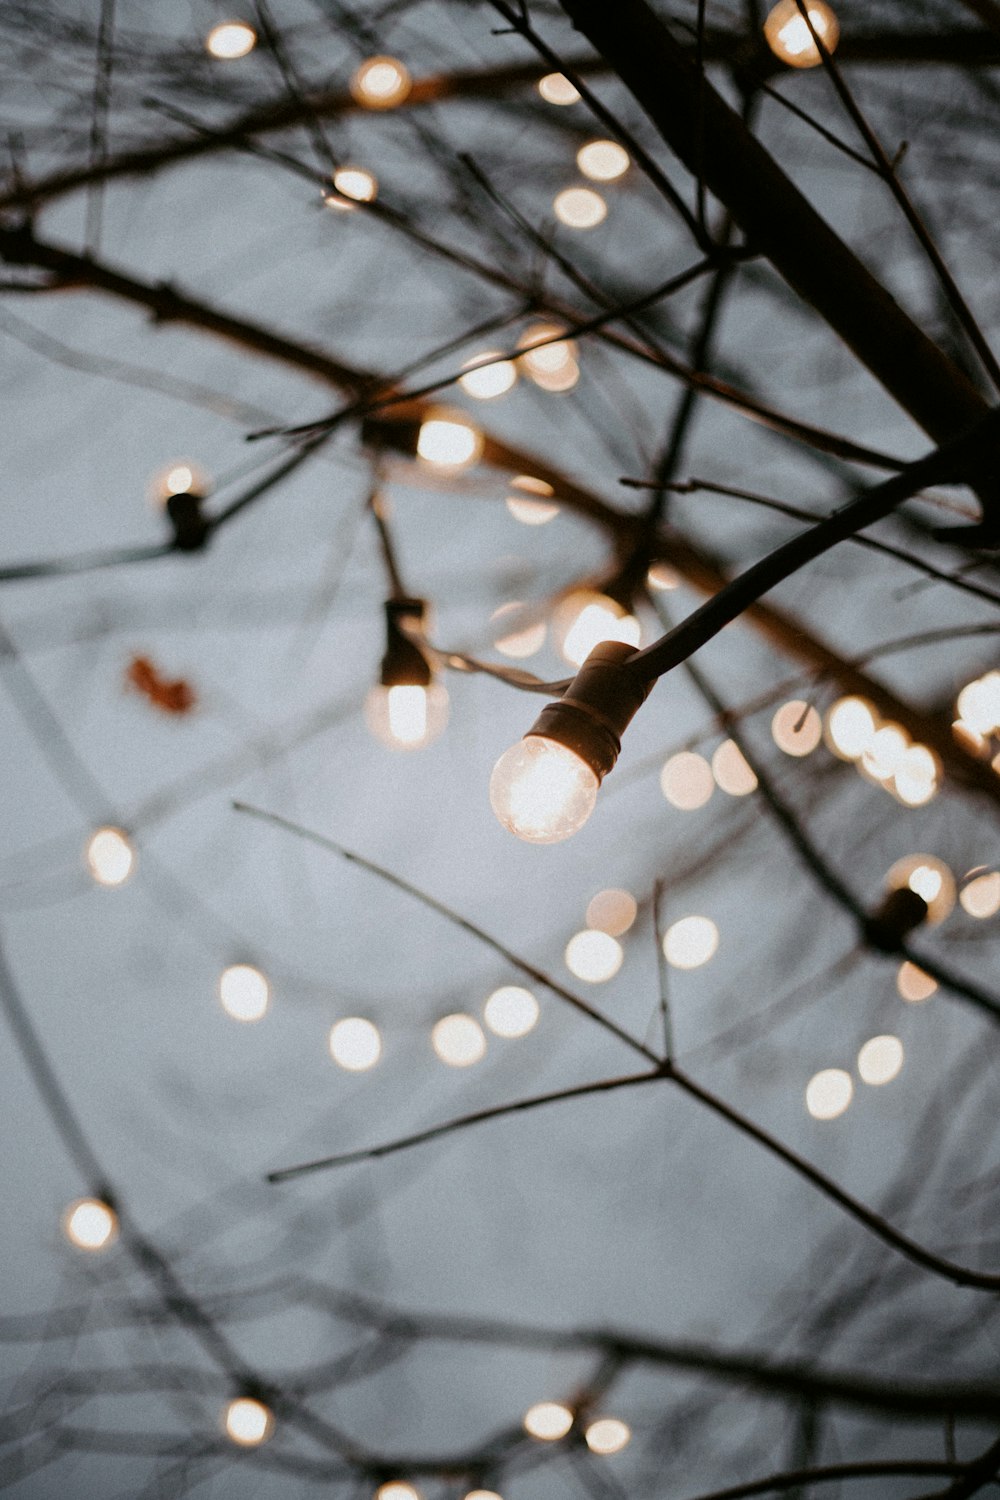 Black metal light post with string lights photo – Free Grey Image on ...